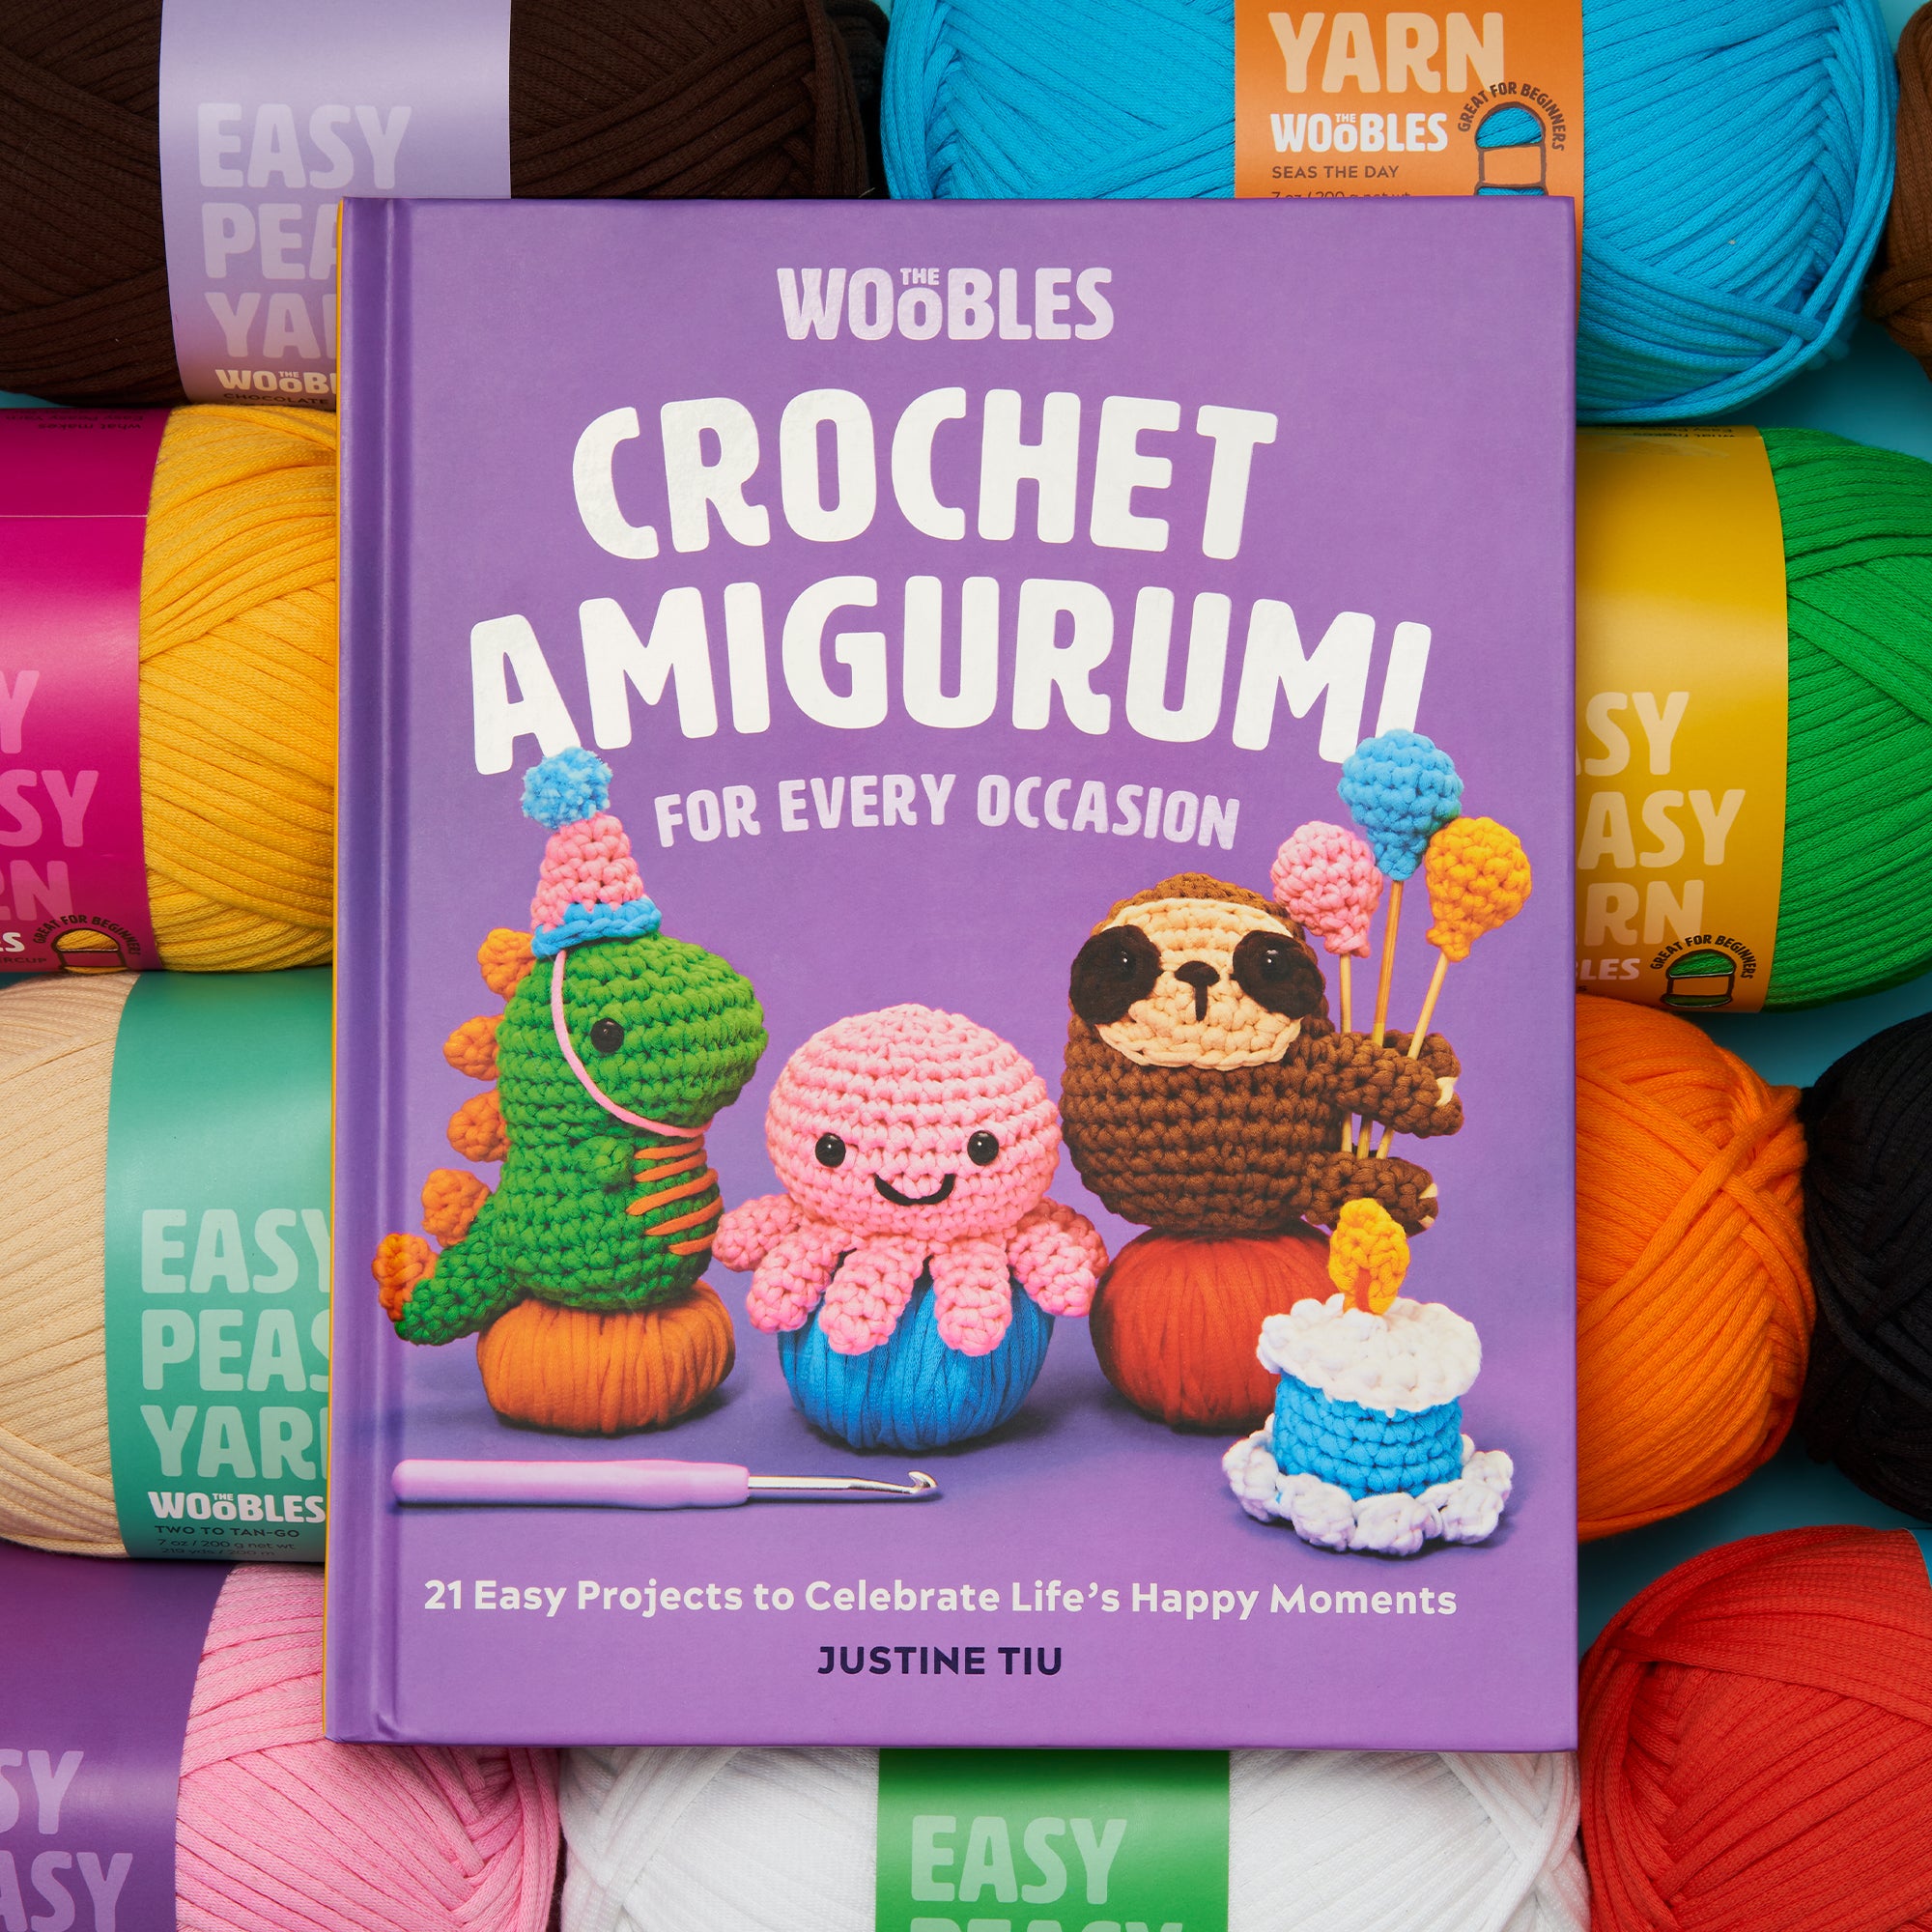 The Woobles Easy Peasy Yarn, Crochet & Knitting Yarn for Beginners with  Easy-to-See Stitches - Yarn for Crocheting… - The Community Connection